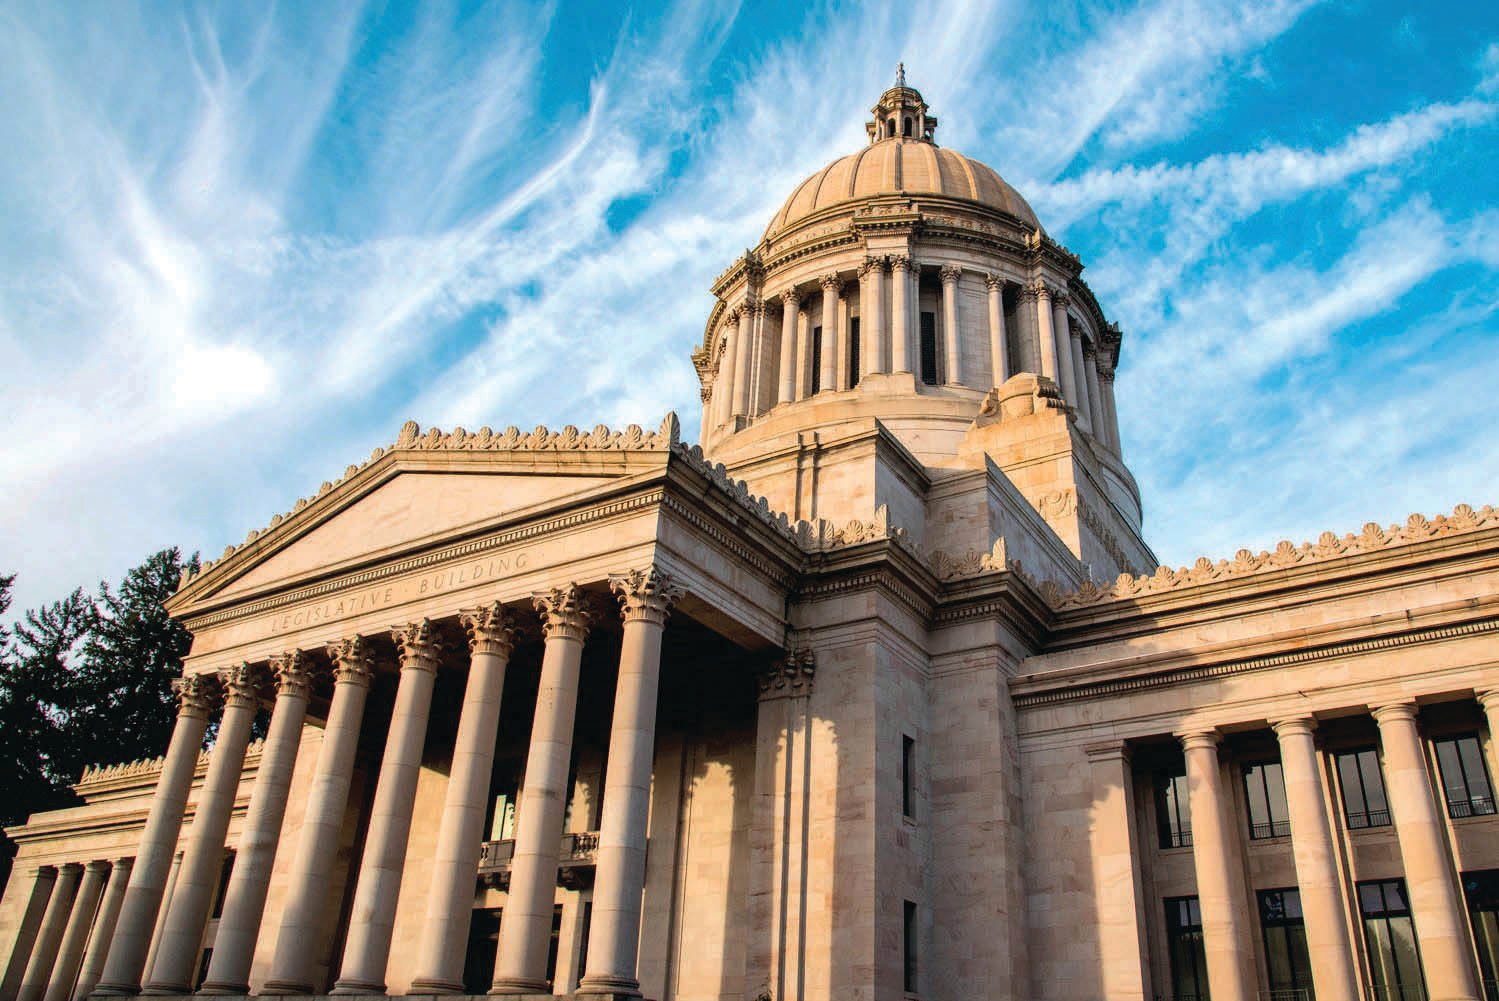 The Washington State Capitol building in Olympia is pictured in this file photo.